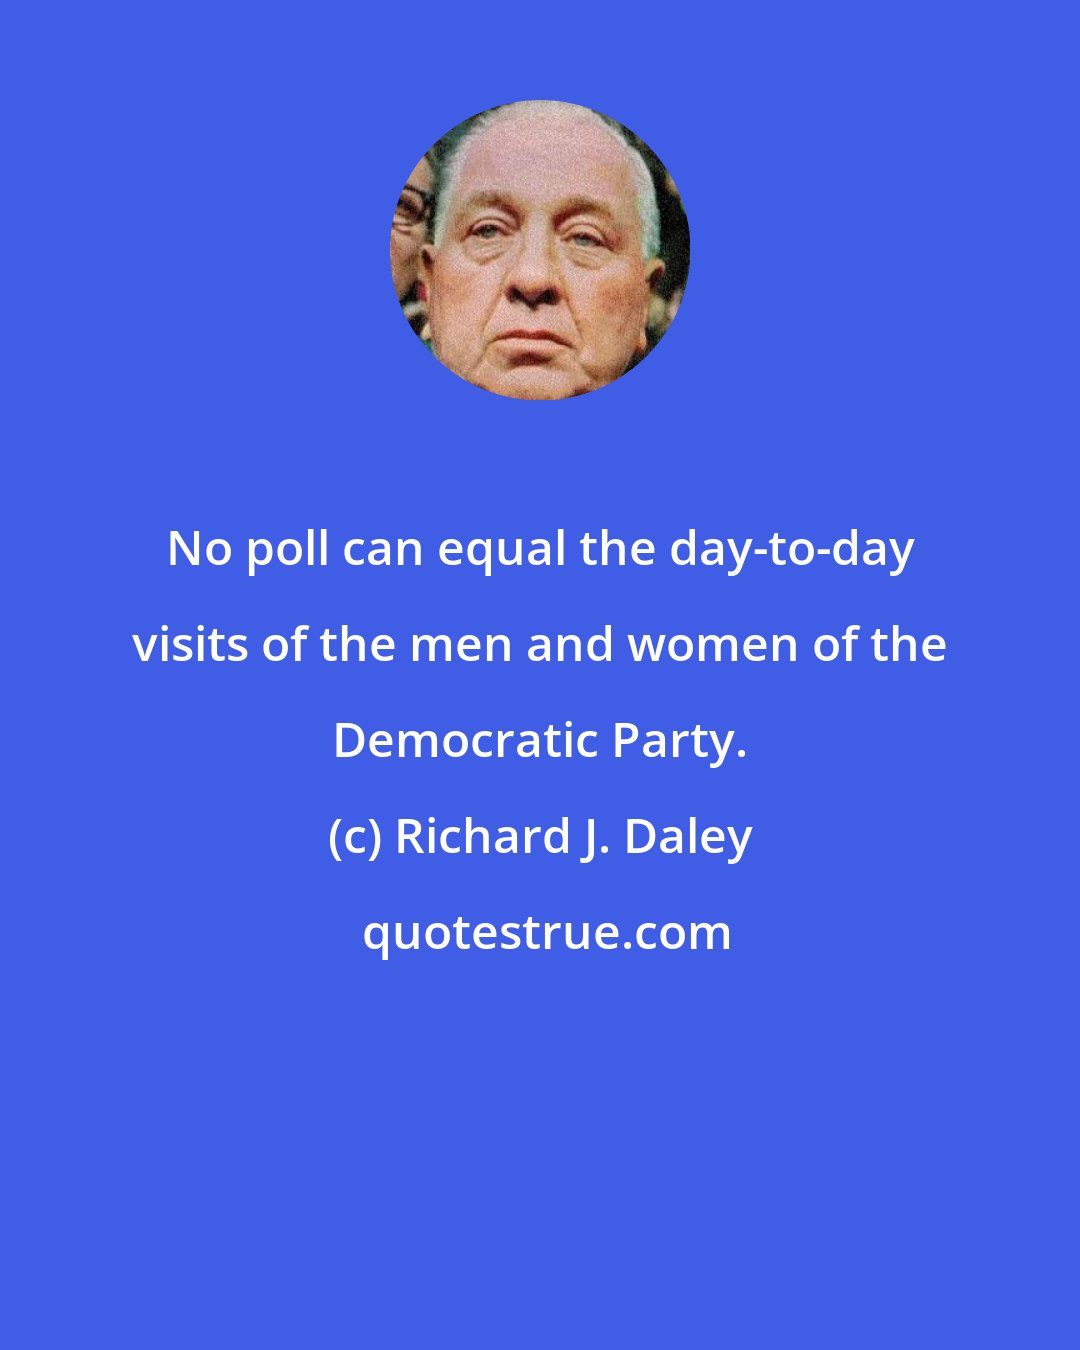 Richard J. Daley: No poll can equal the day-to-day visits of the men and women of the Democratic Party.